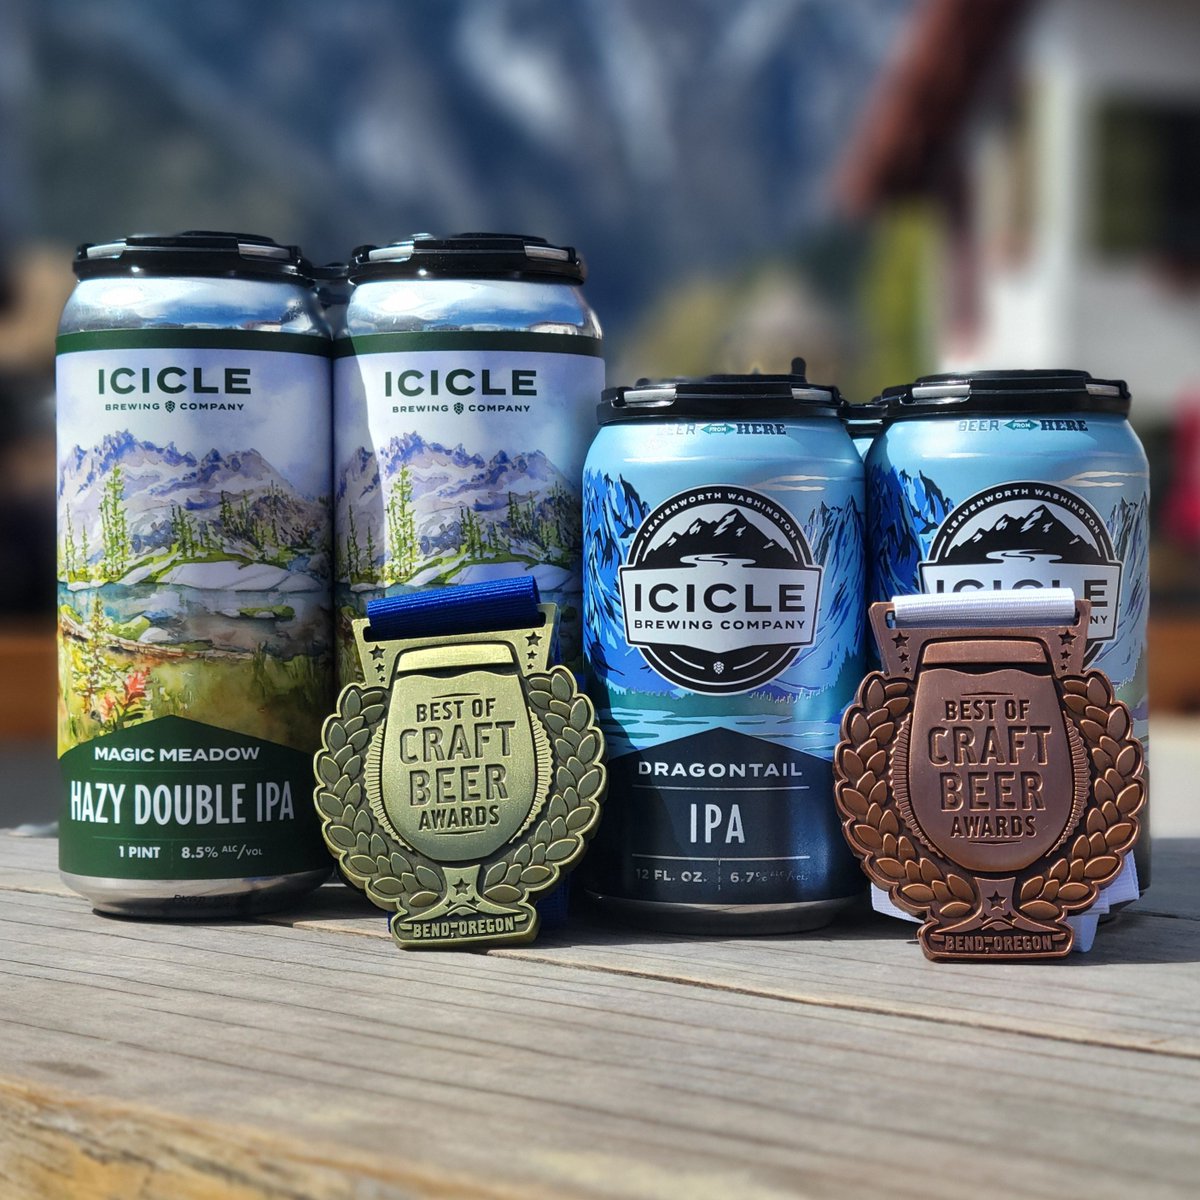 At Icicle, we hold ourselves to a high standard when it comes to brewing premium craft beers – the gold standard! We were honored to take home the gold medal for Magic Meadow Hazy Double IPA and bronze for Dragontail IPA at the Best of Craft Beer Awards held last month in Oregon.